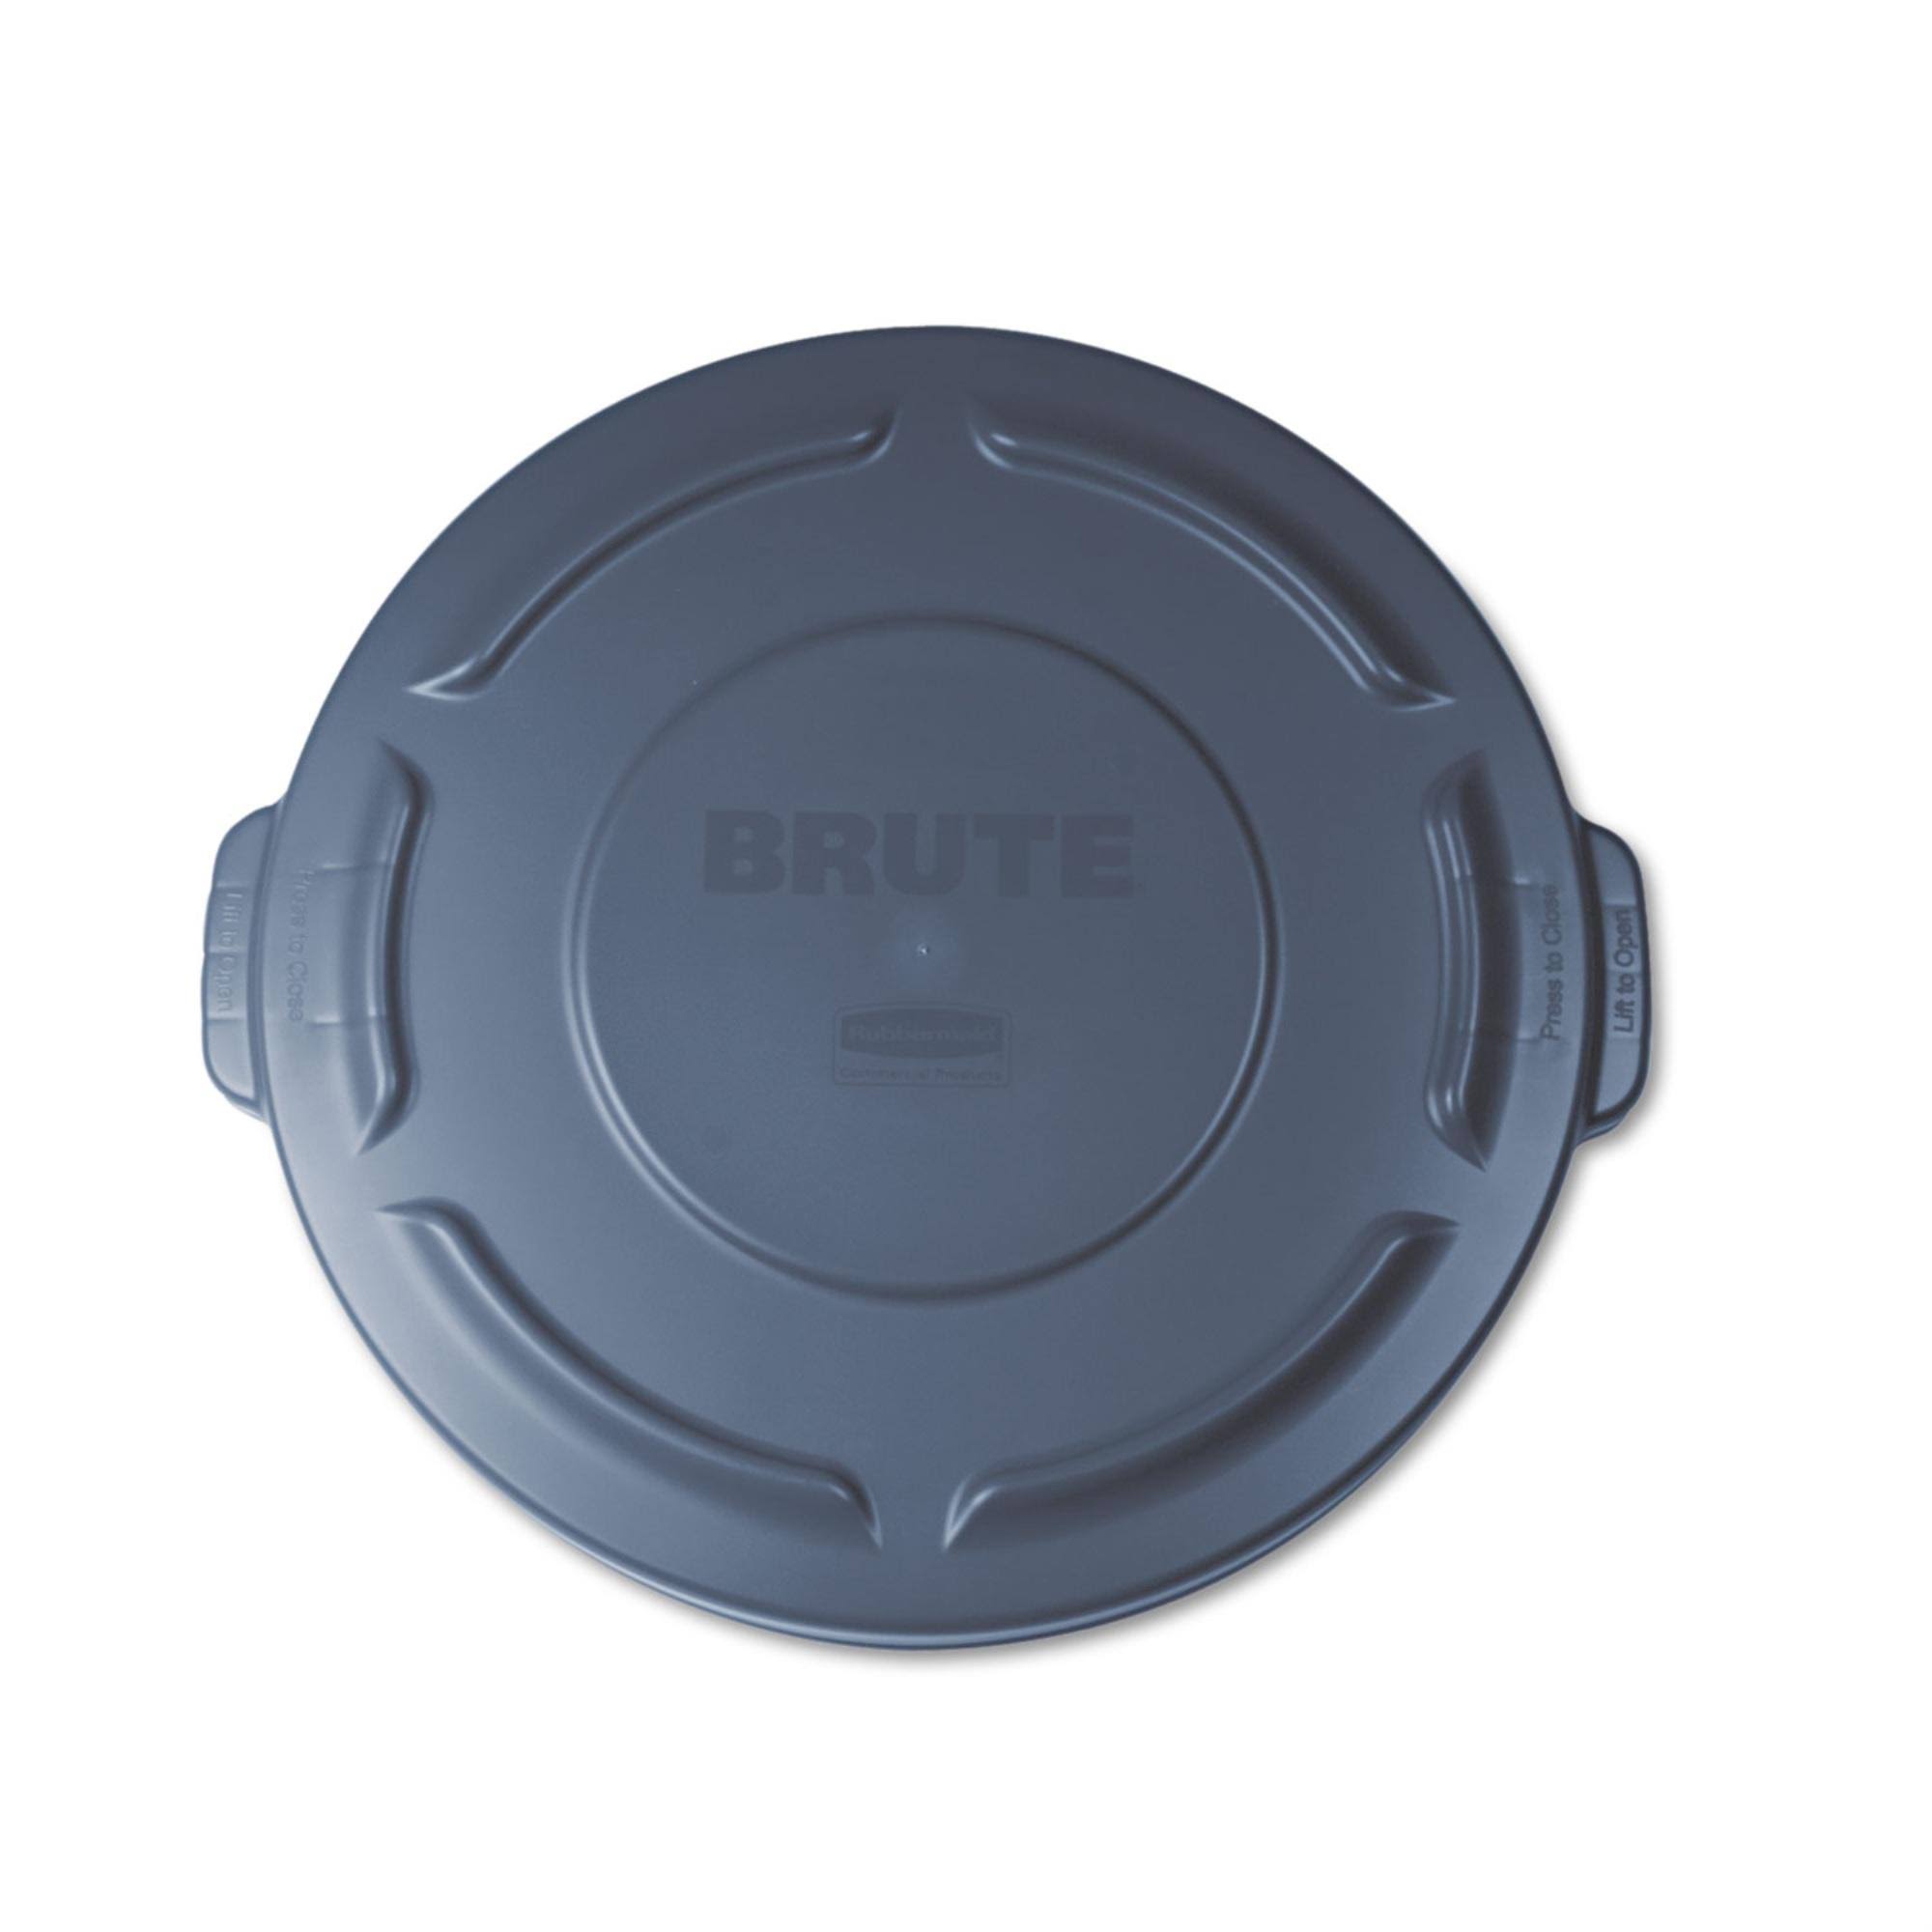 Rubbermaid Round Brute Lid - 19 7/8 in, Gray